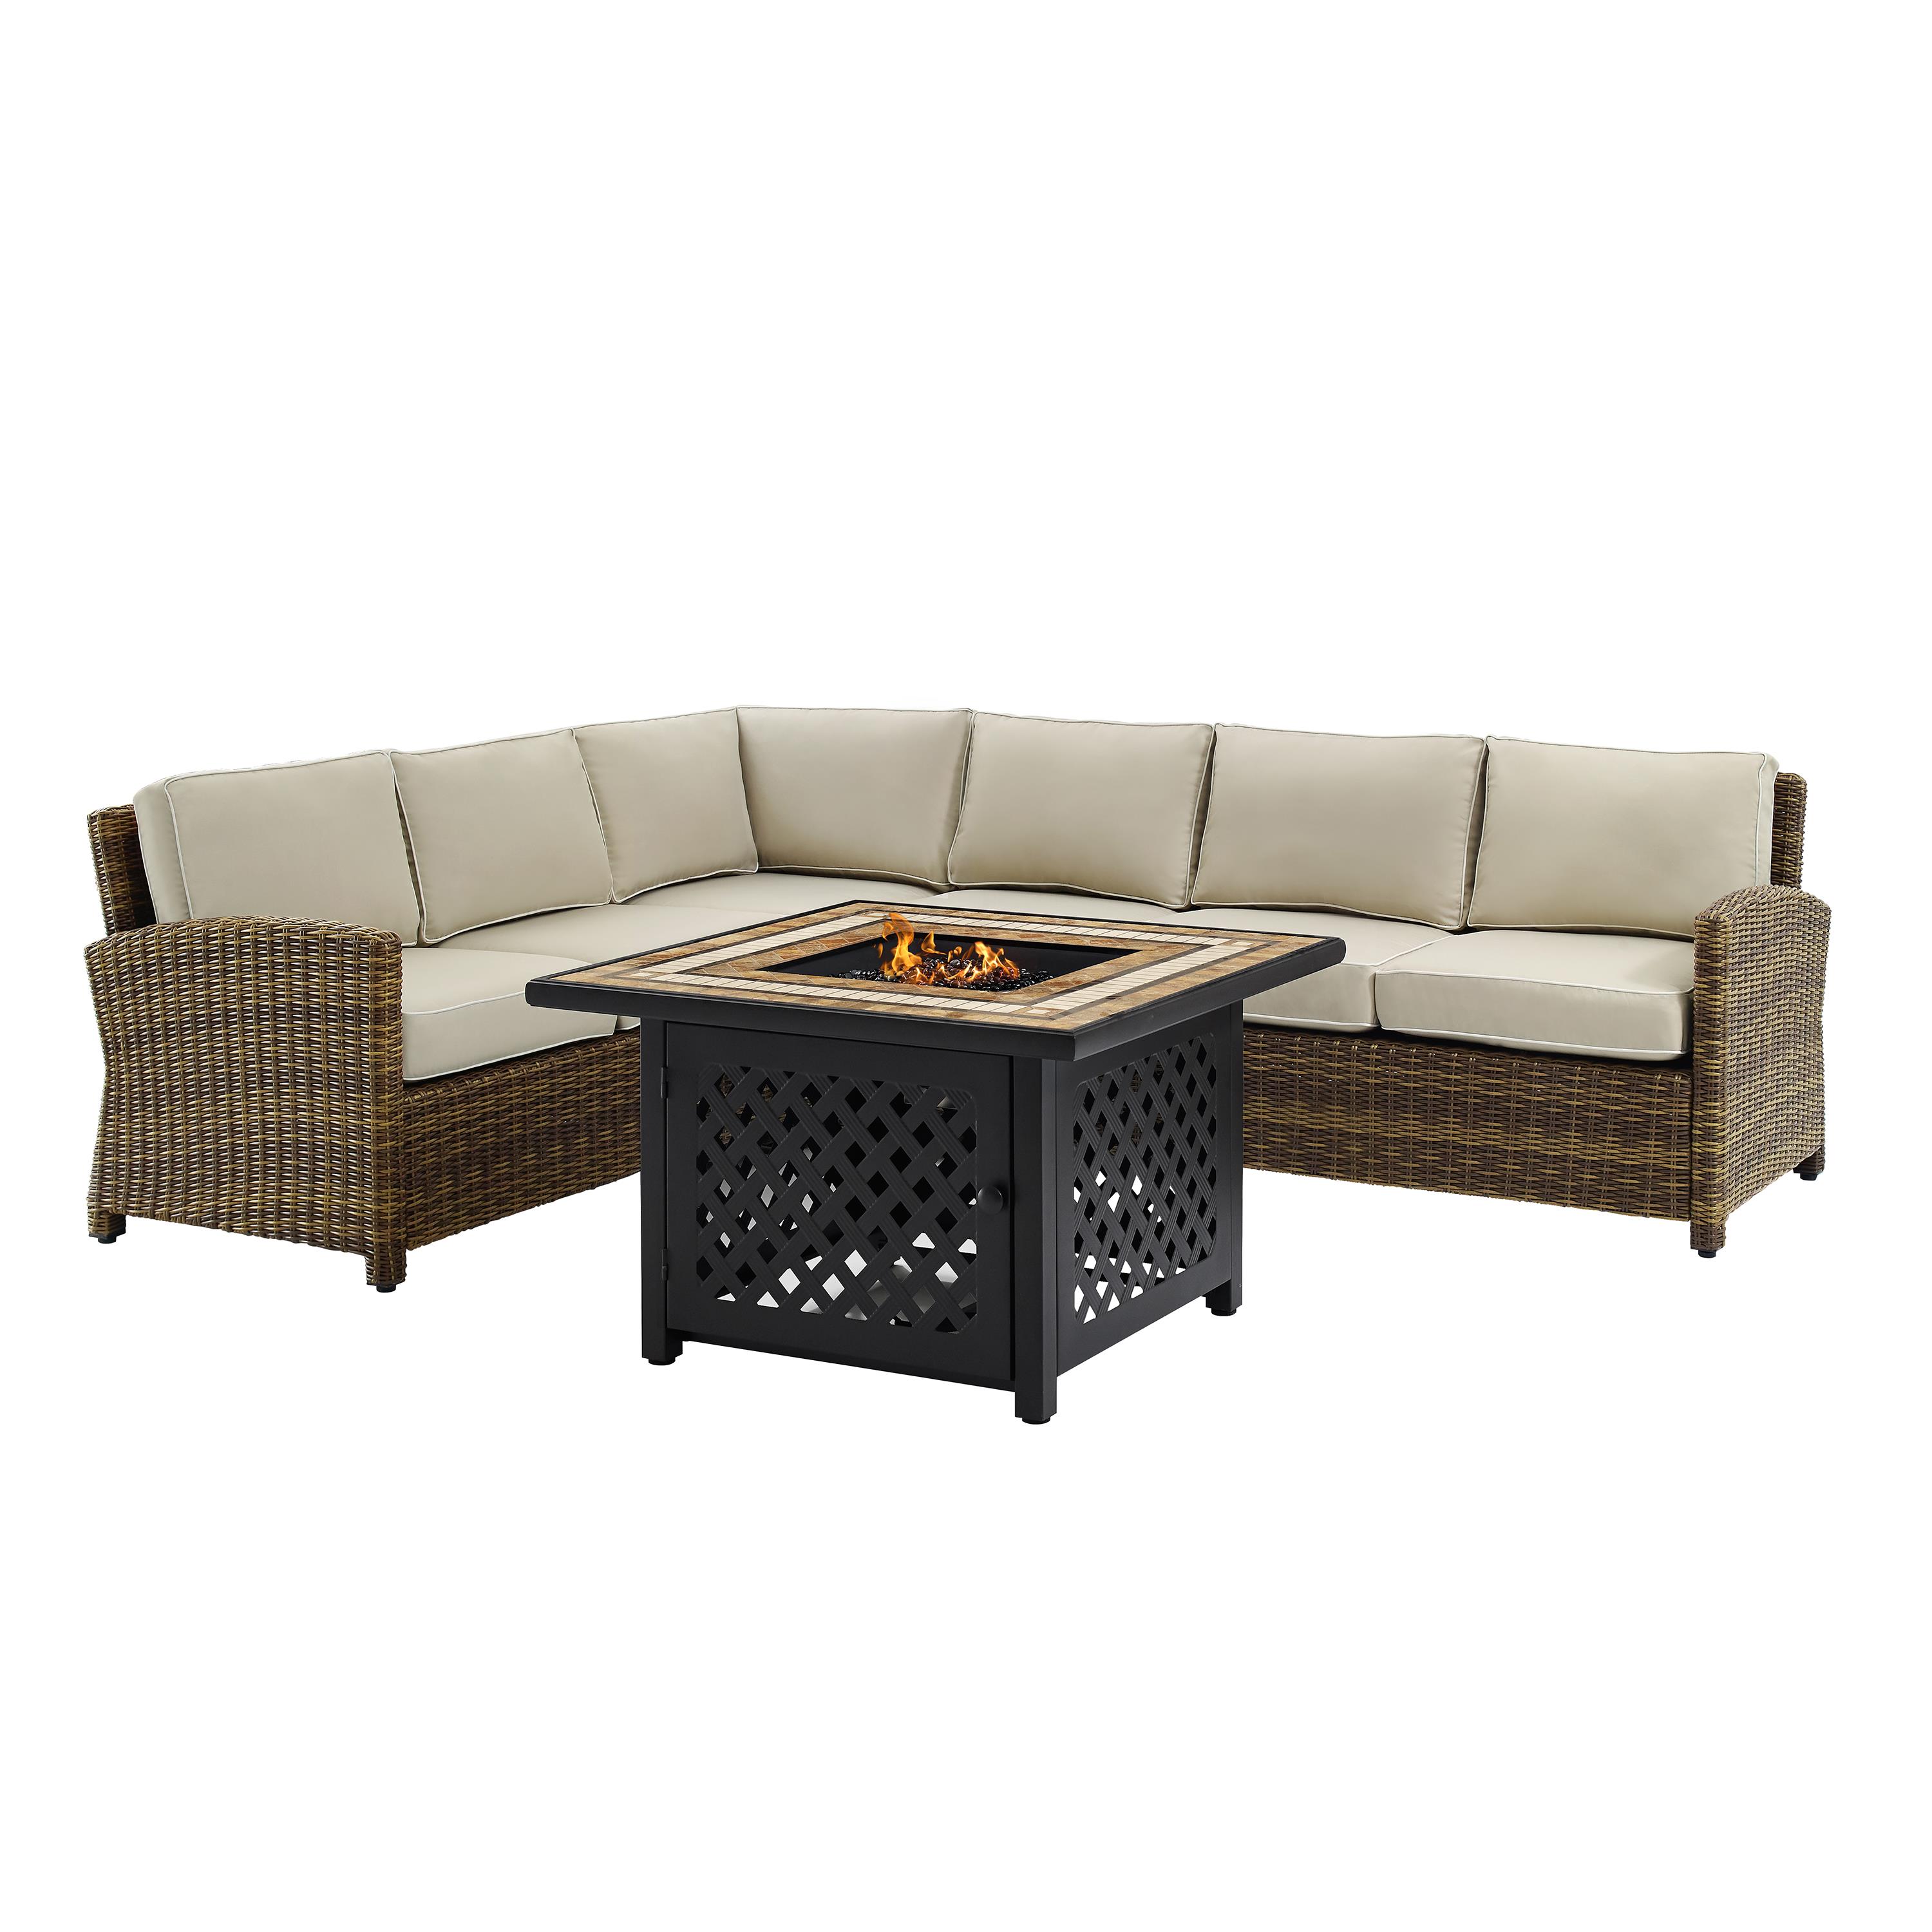 Bradenton 5Pc Outdoor Wicker Sectional Set W/Fire Table Weathered Brown/Sand - Right Corner Loveseat, Left Corner Loveseat, Corner Chair, Center Chair, & Tucson Fire Table - image 3 of 9